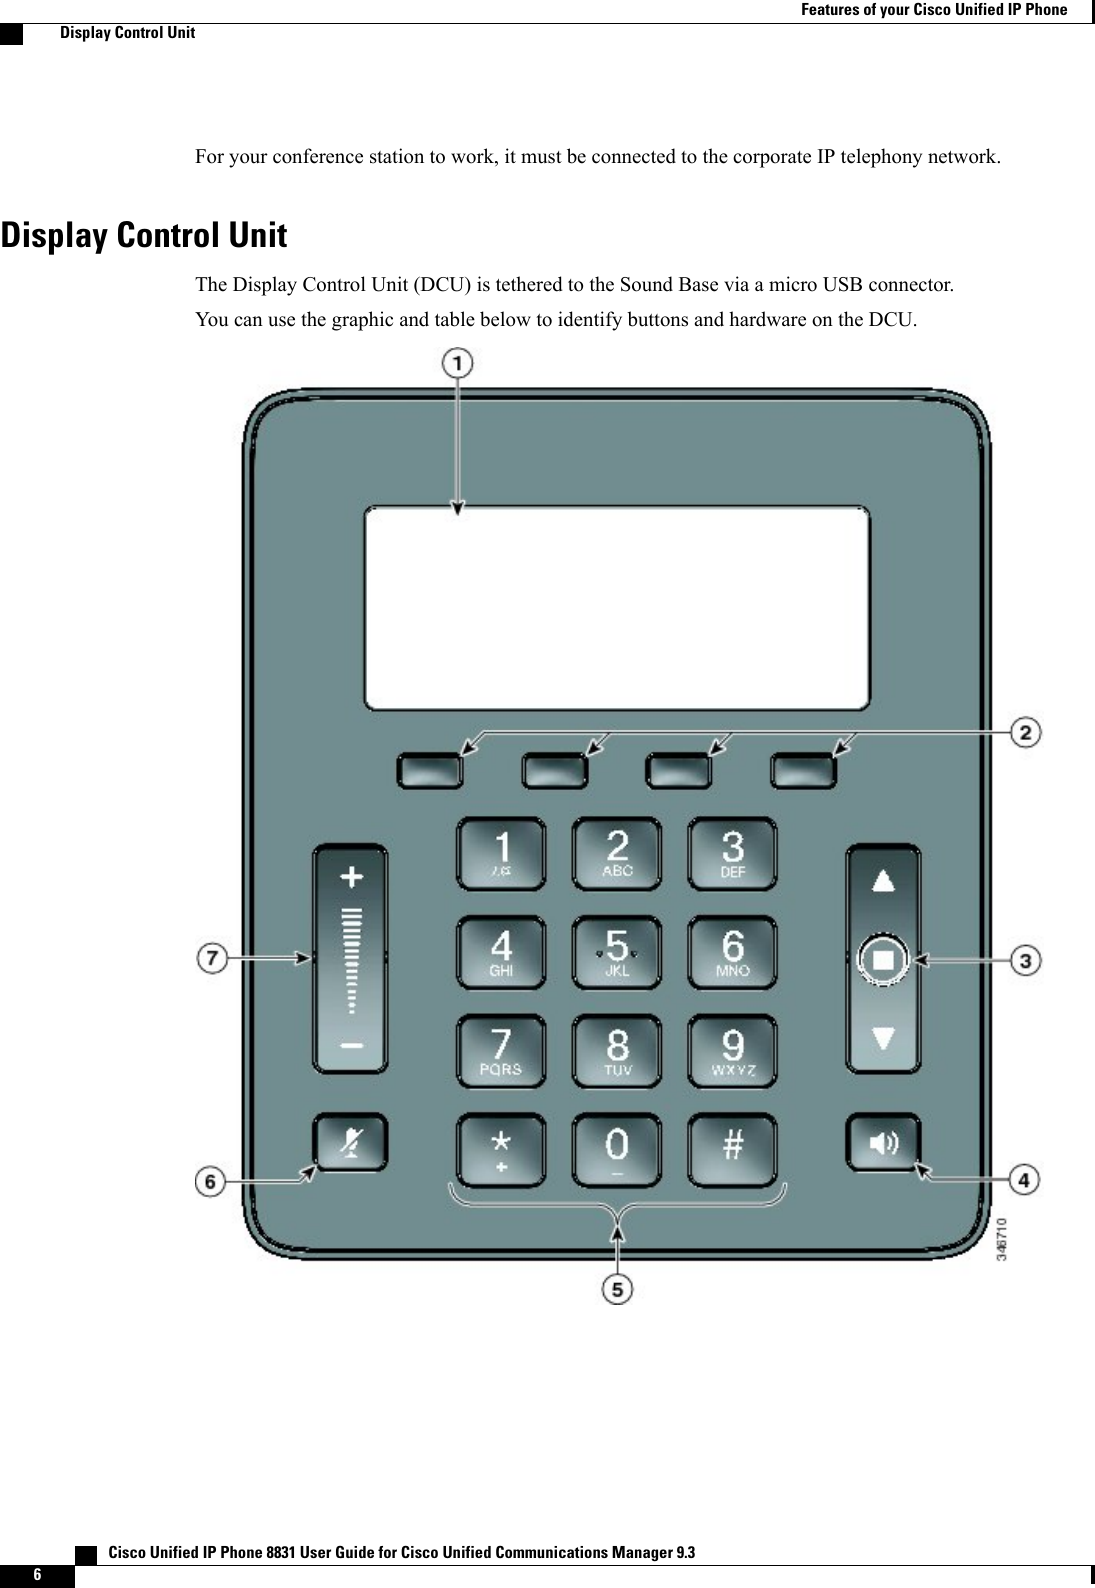 For your conference station to work, it must be connected to the corporate IP telephony network.Display Control UnitThe Display Control Unit (DCU) is tethered to the Sound Base via a micro USB connector.You can use the graphic and table below to identify buttons and hardware on the DCU.   Cisco Unified IP Phone 8831 User Guide for Cisco Unified Communications Manager 9.36Features of your Cisco Unified IP PhoneDisplay Control Unit